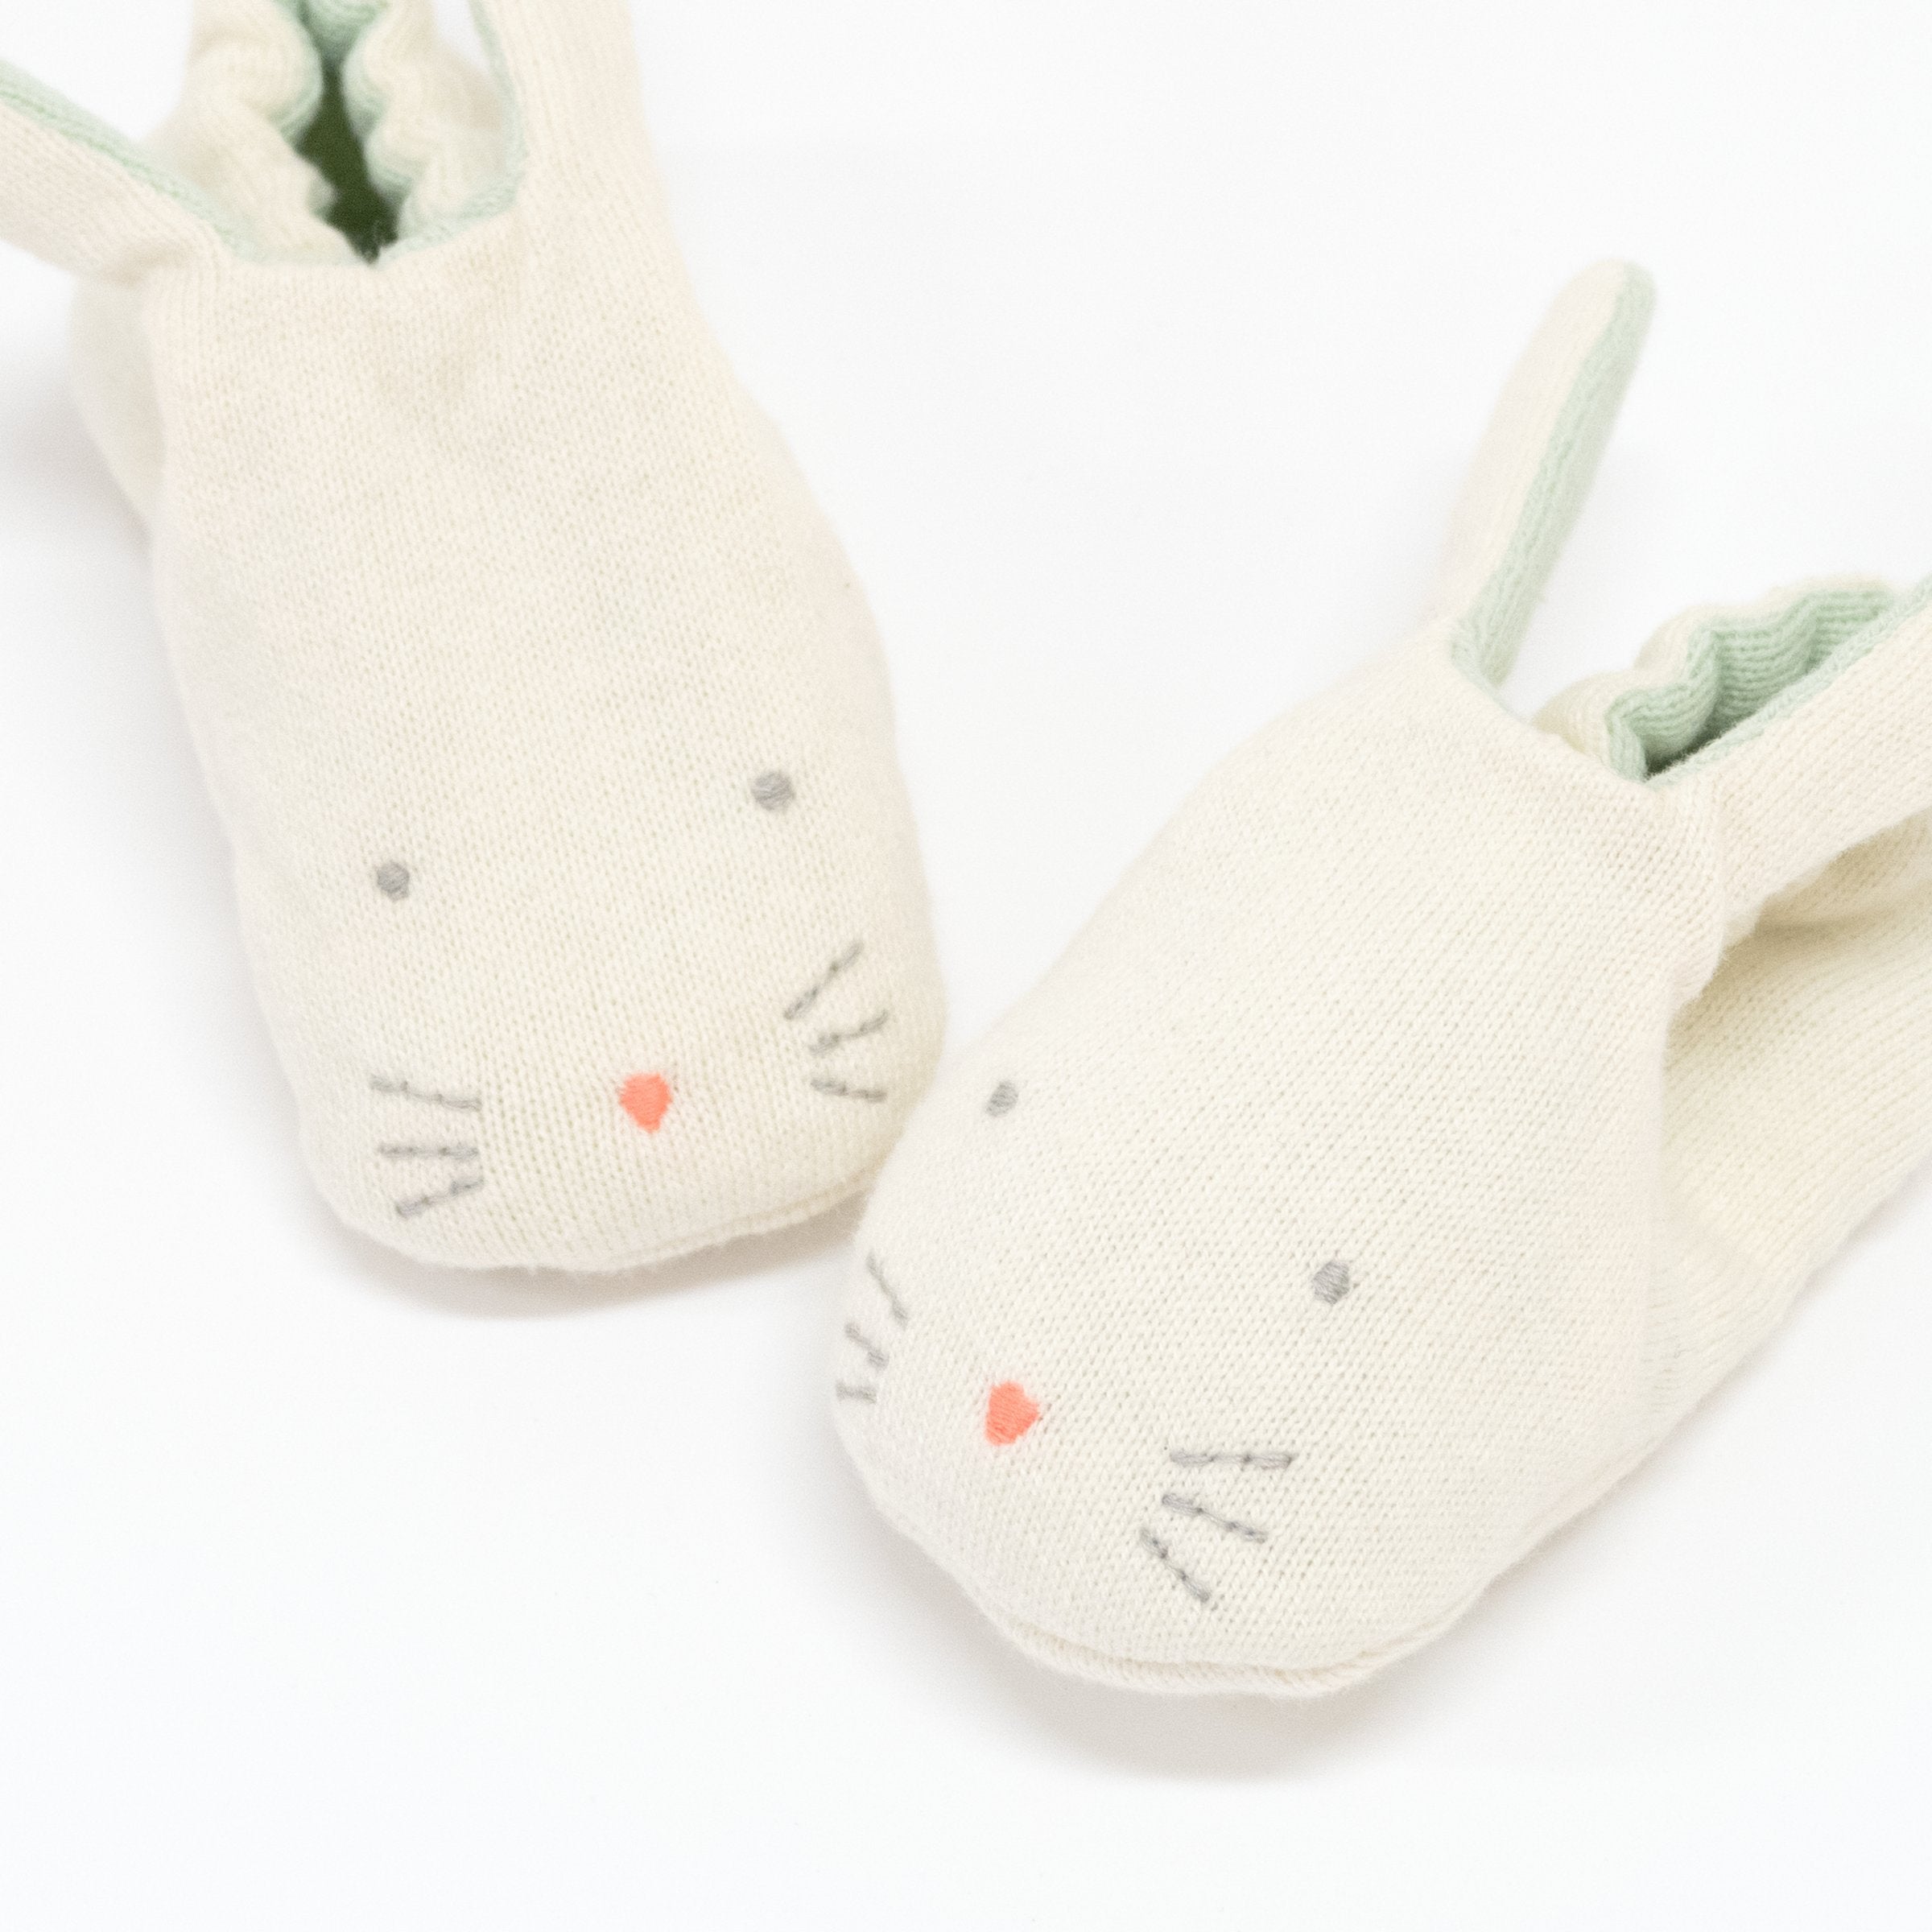 These adorable bunny booties are crafted from knitted organic cotton, with a mint lining, stitched features and floppy ears.